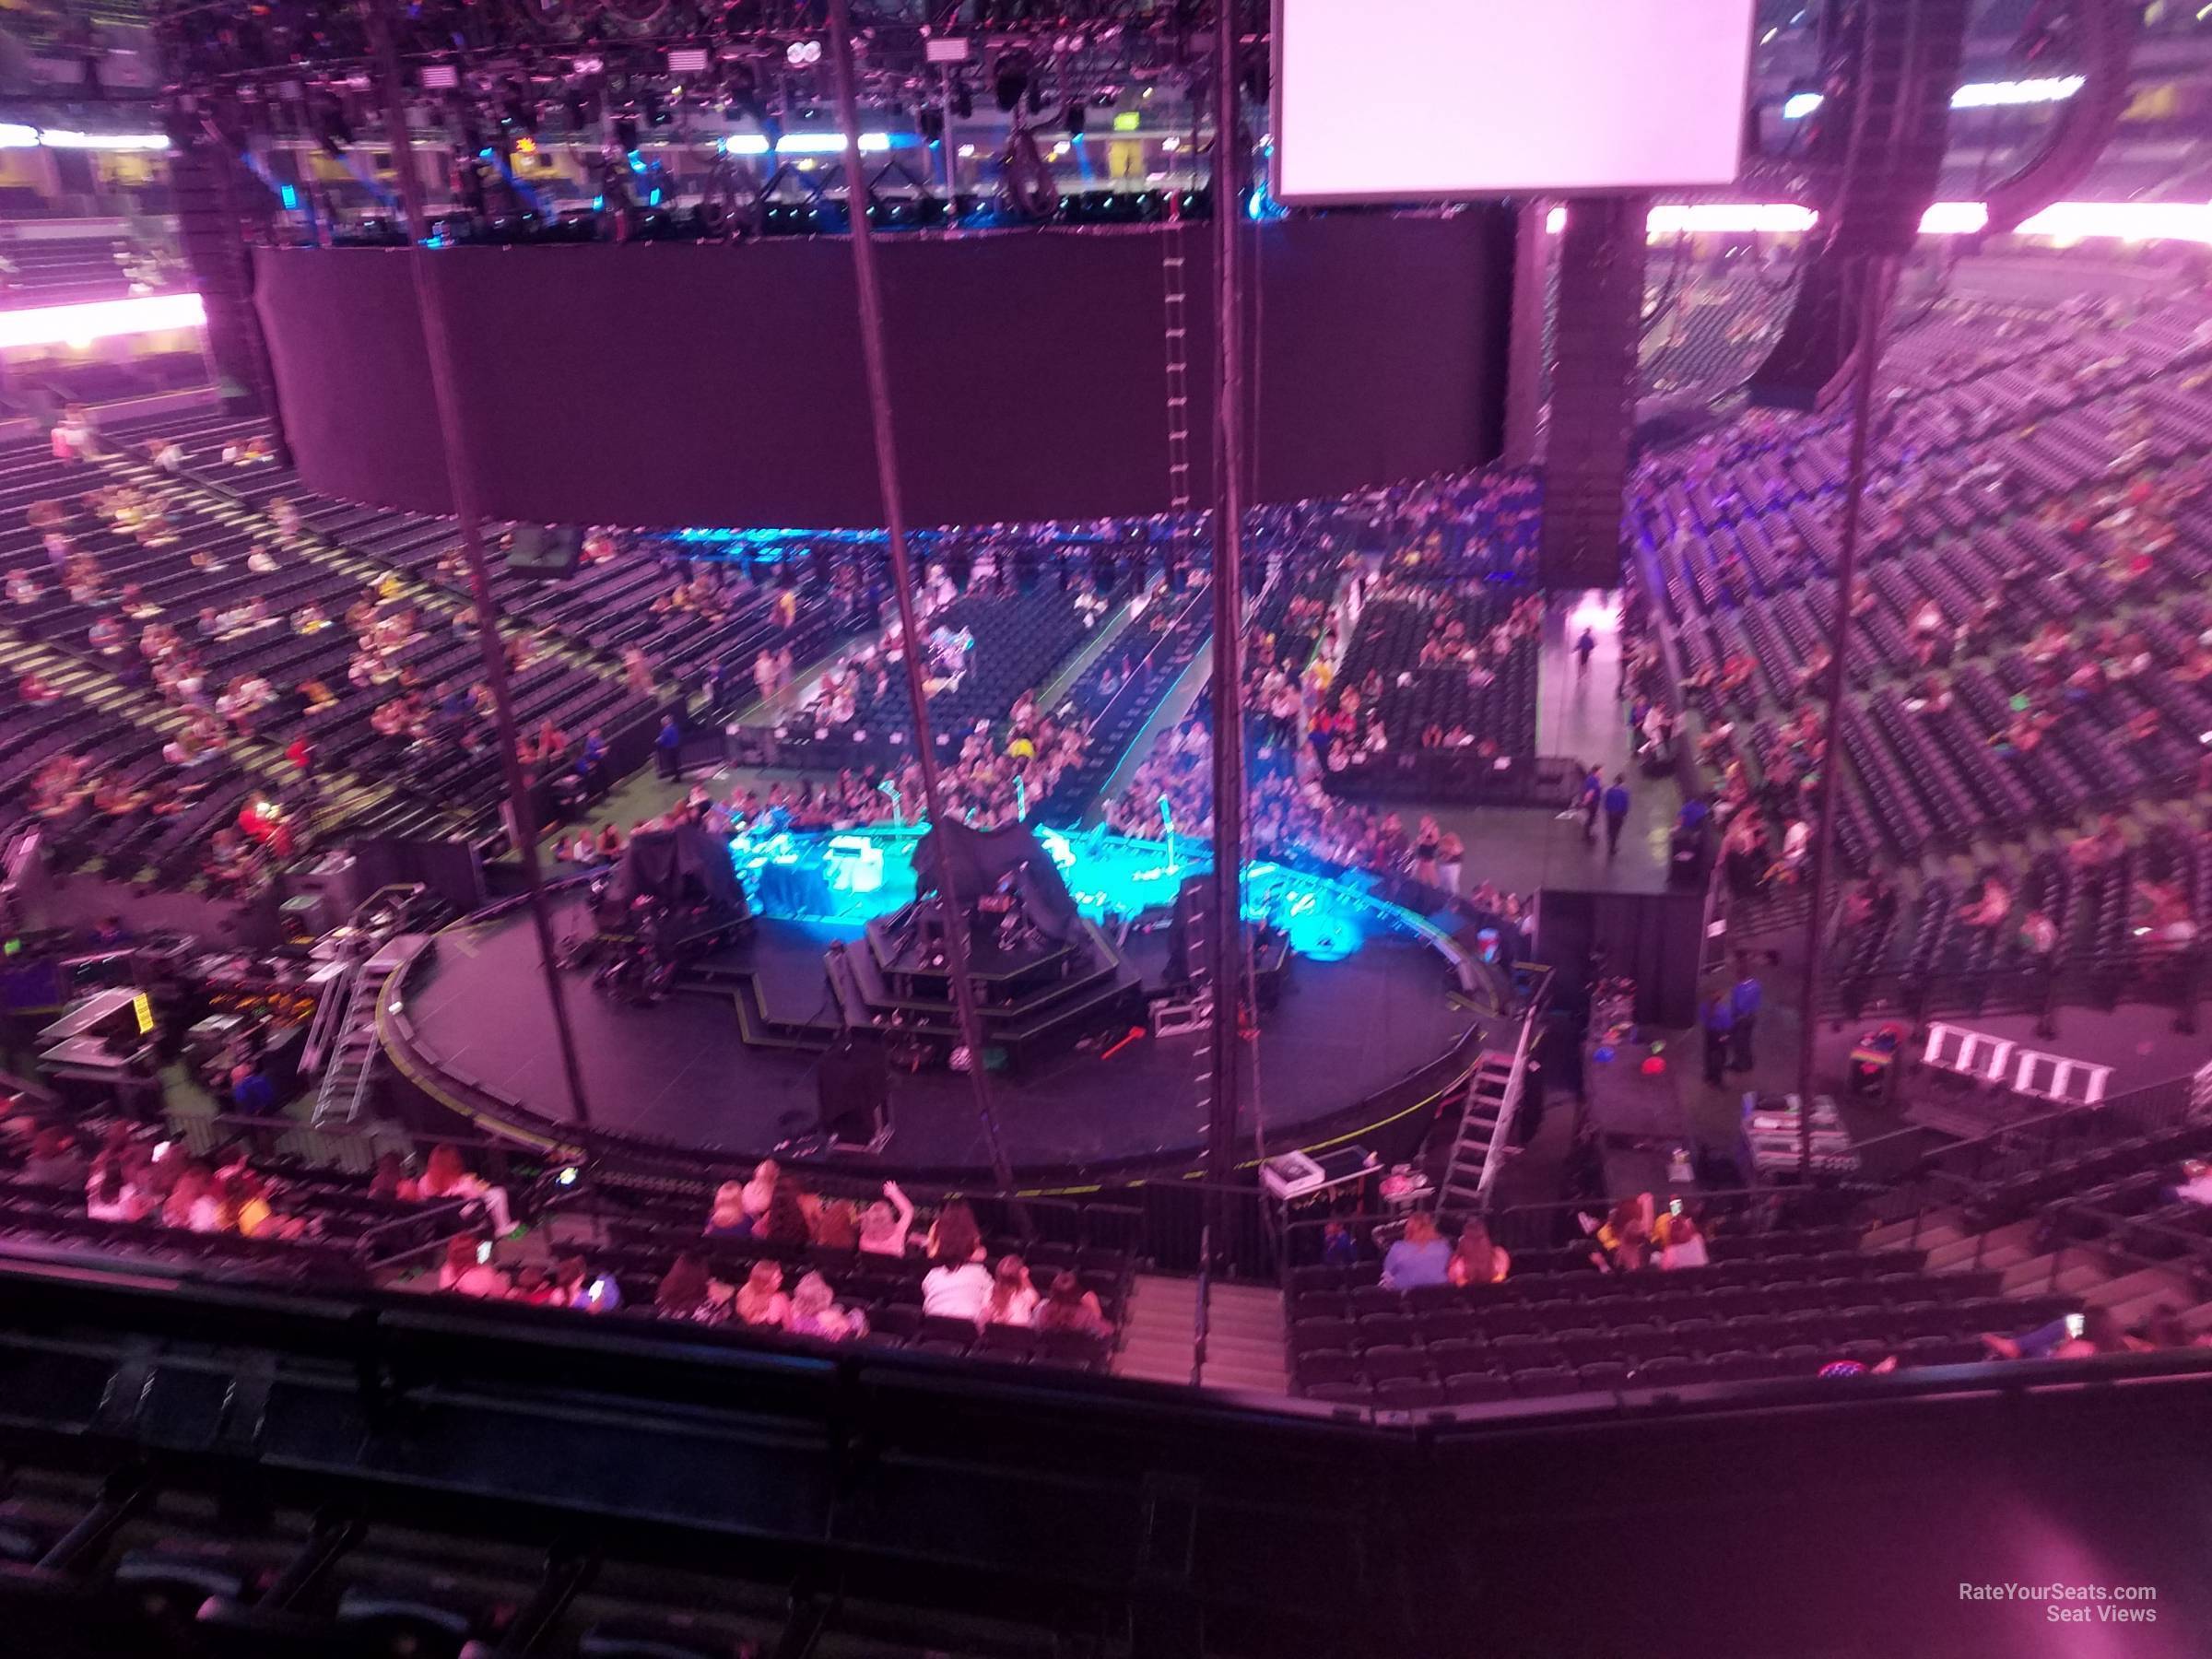 section 244, row 4 seat view  for concert - ball arena